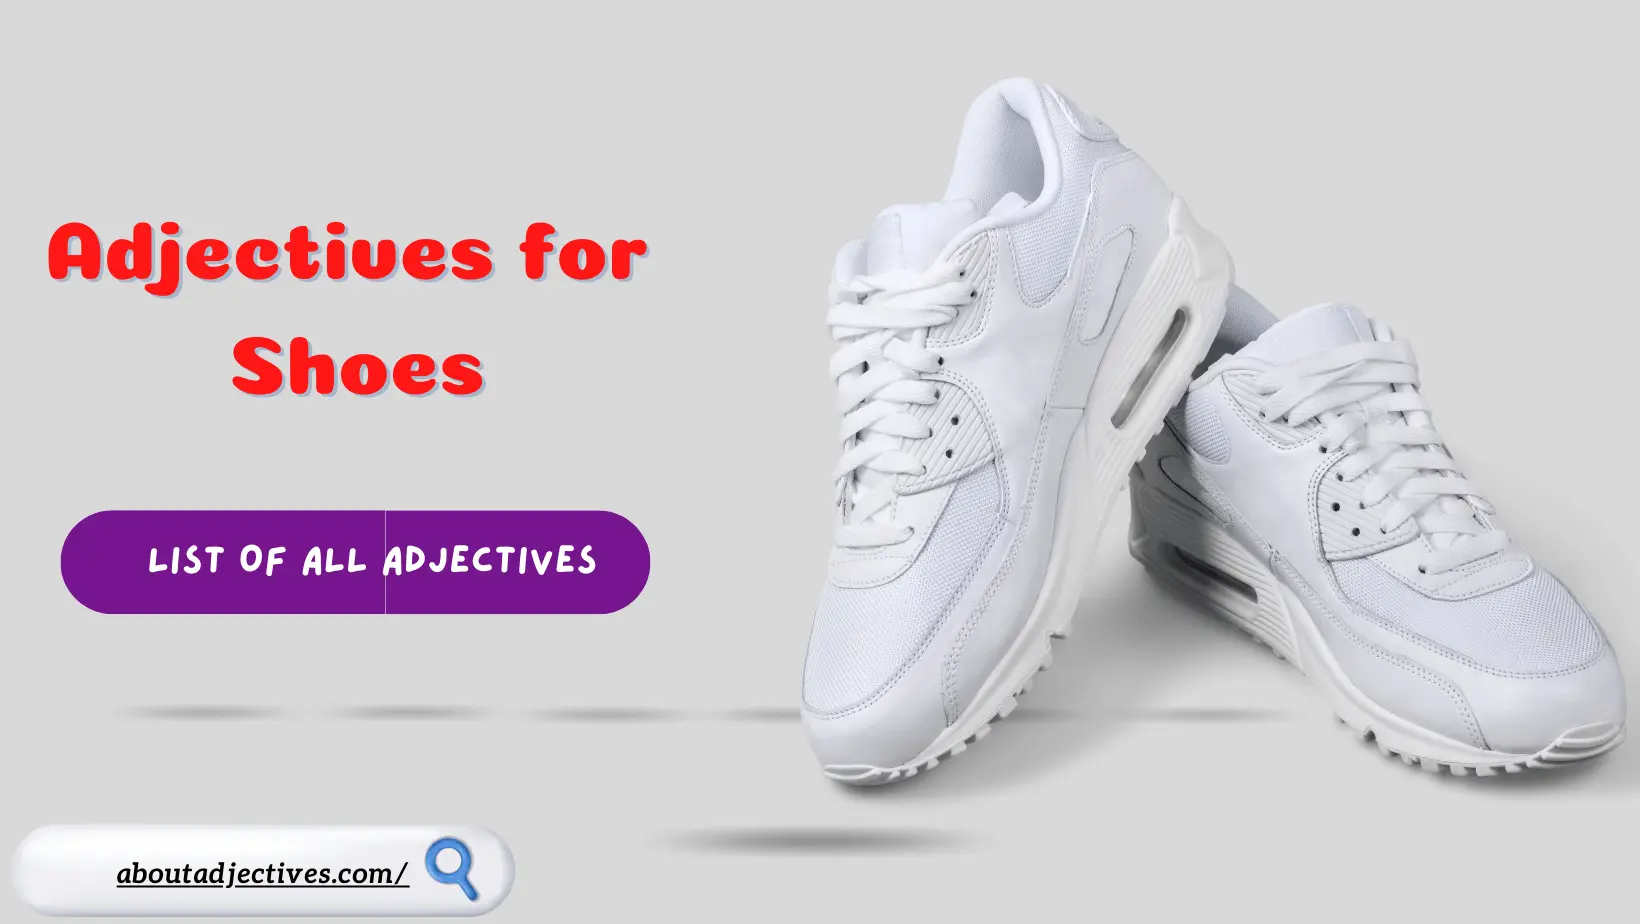 Adjectives for Shoes